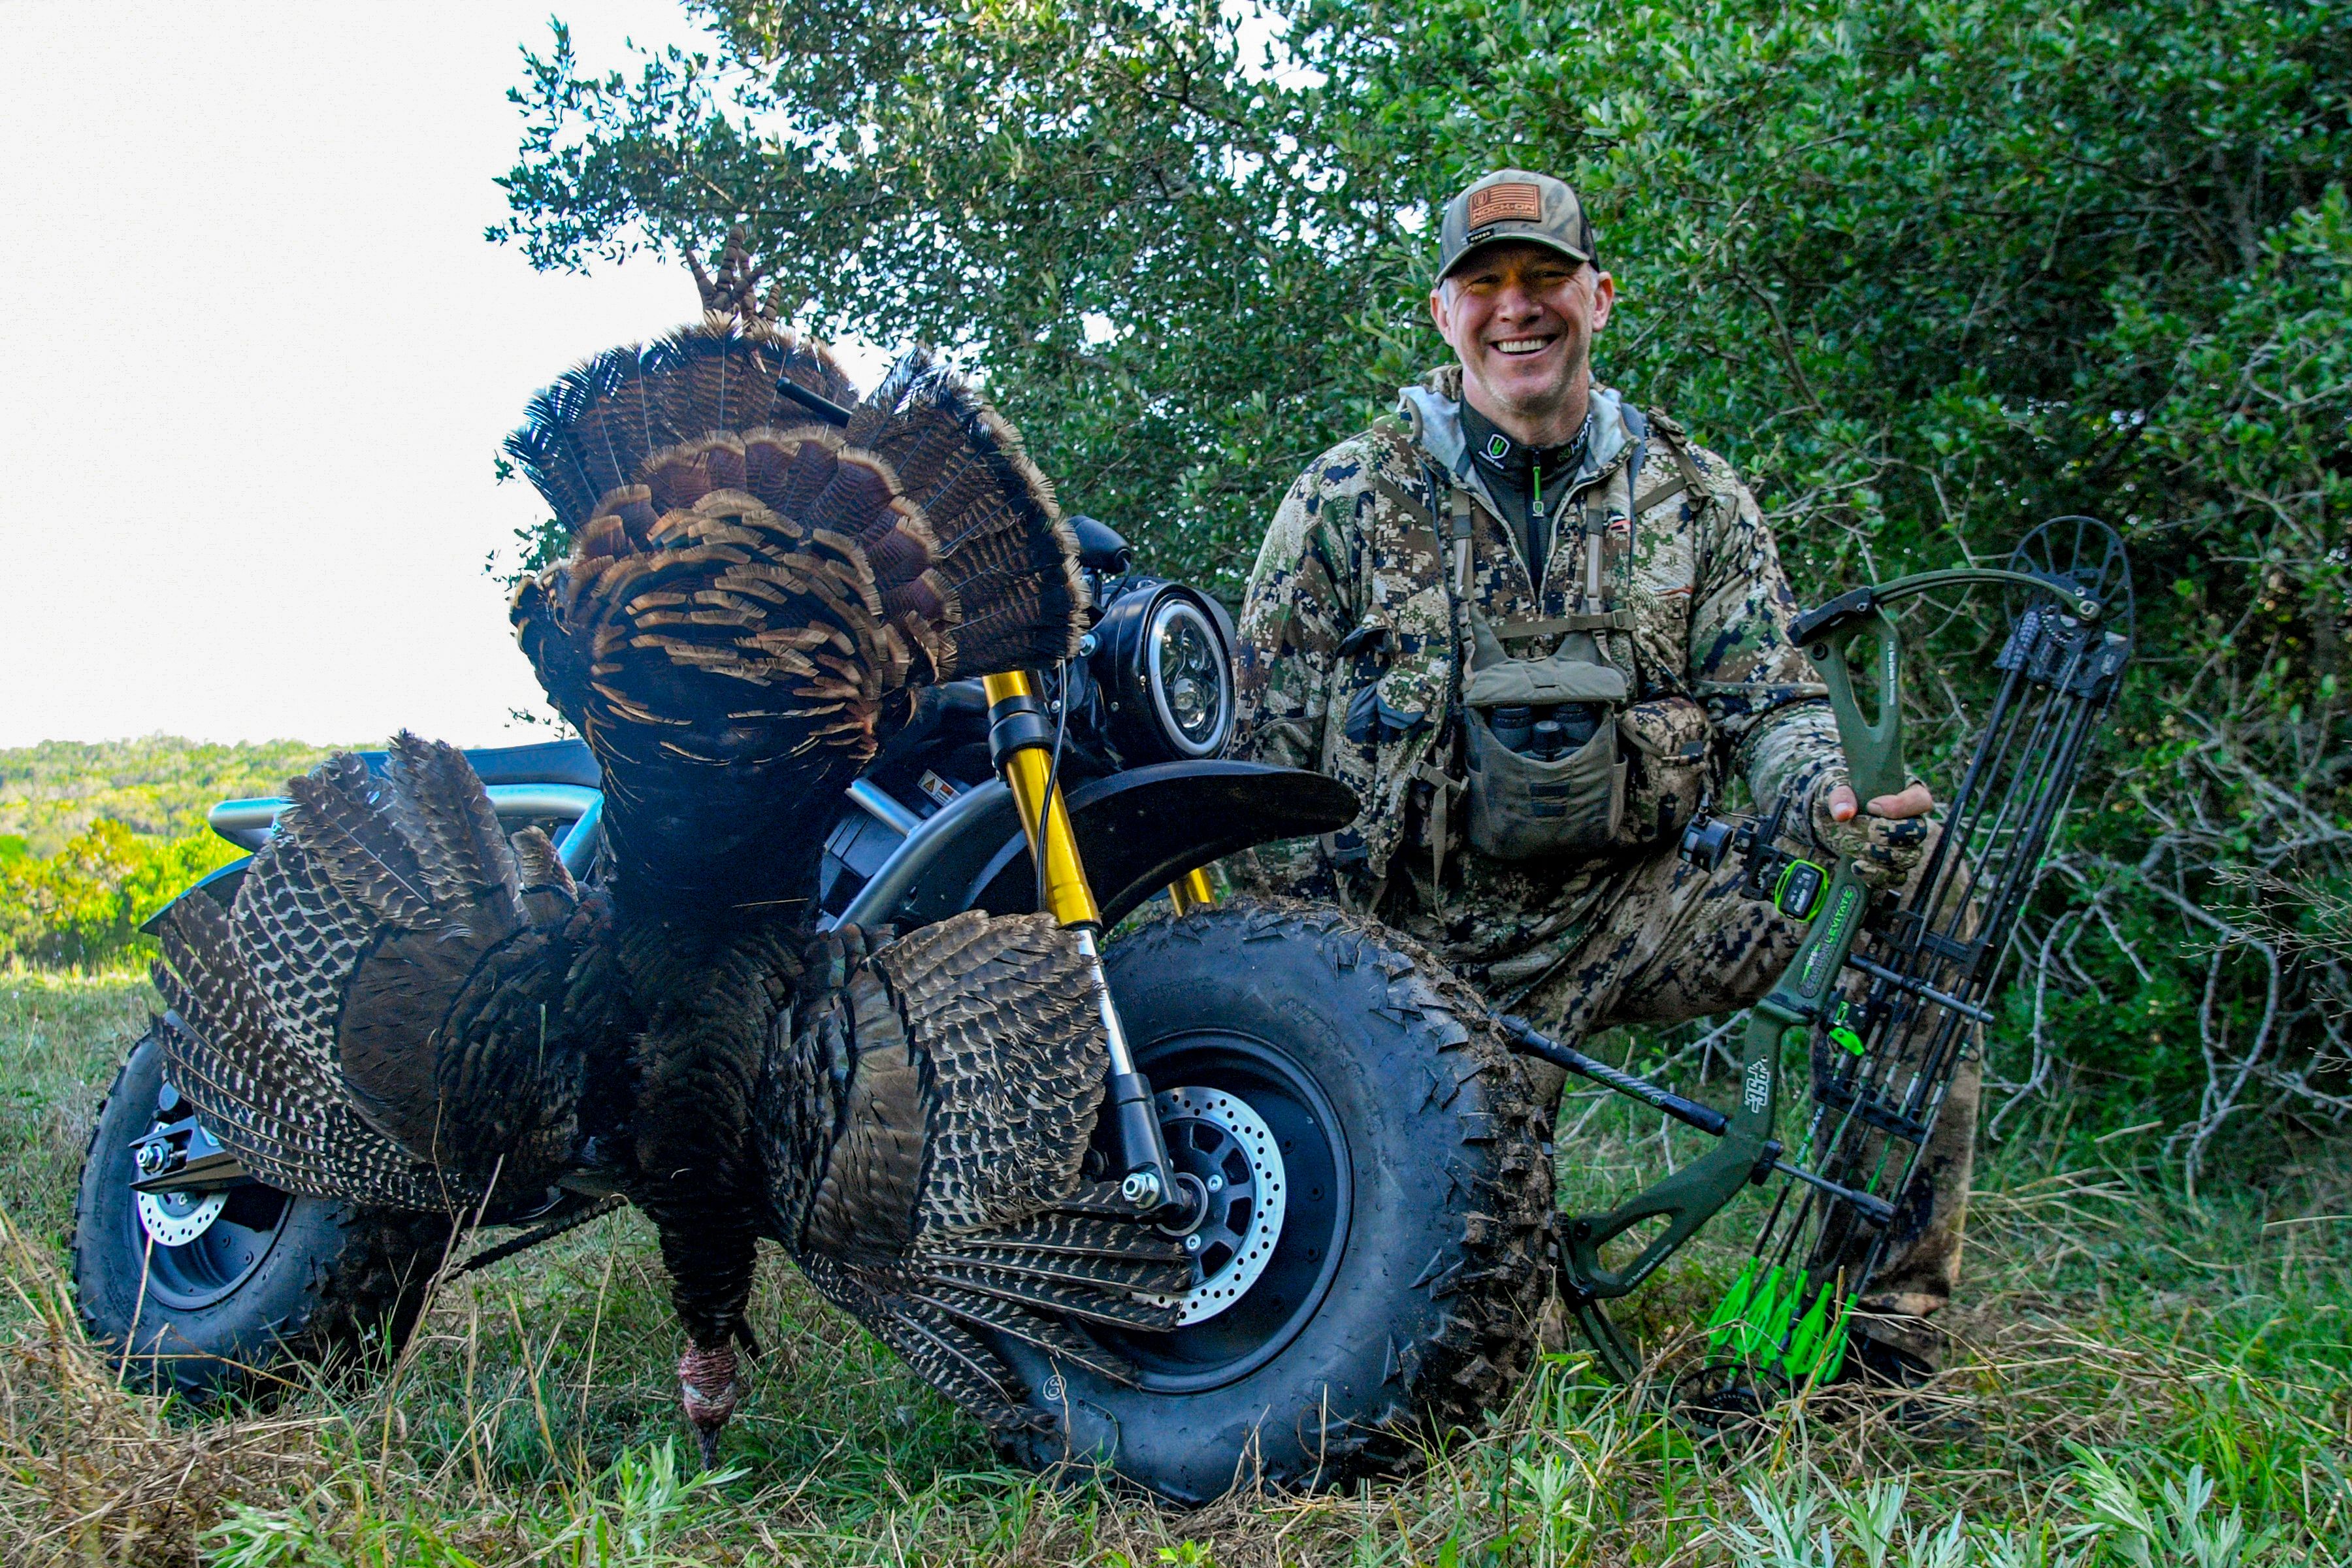 John Dudley talks about setting up close for a successful turkey hunt. 